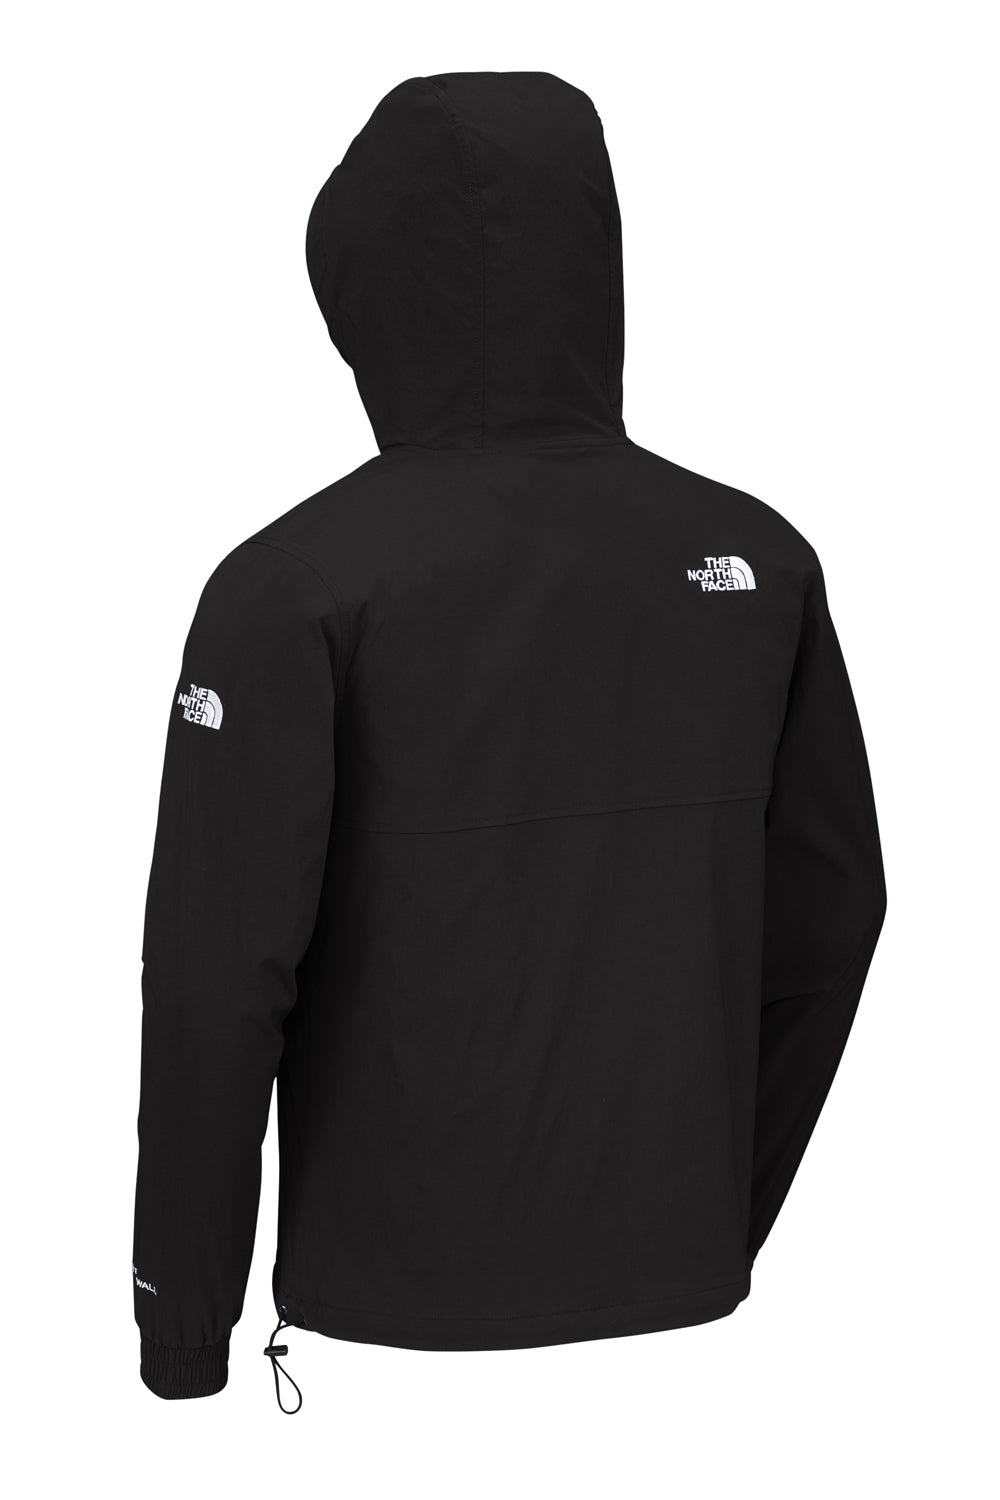 The North Face NF0A5IRW Wind & Water Resistant Packable 1/4 Zip Anorak Hooded Jacket Black Flat Back